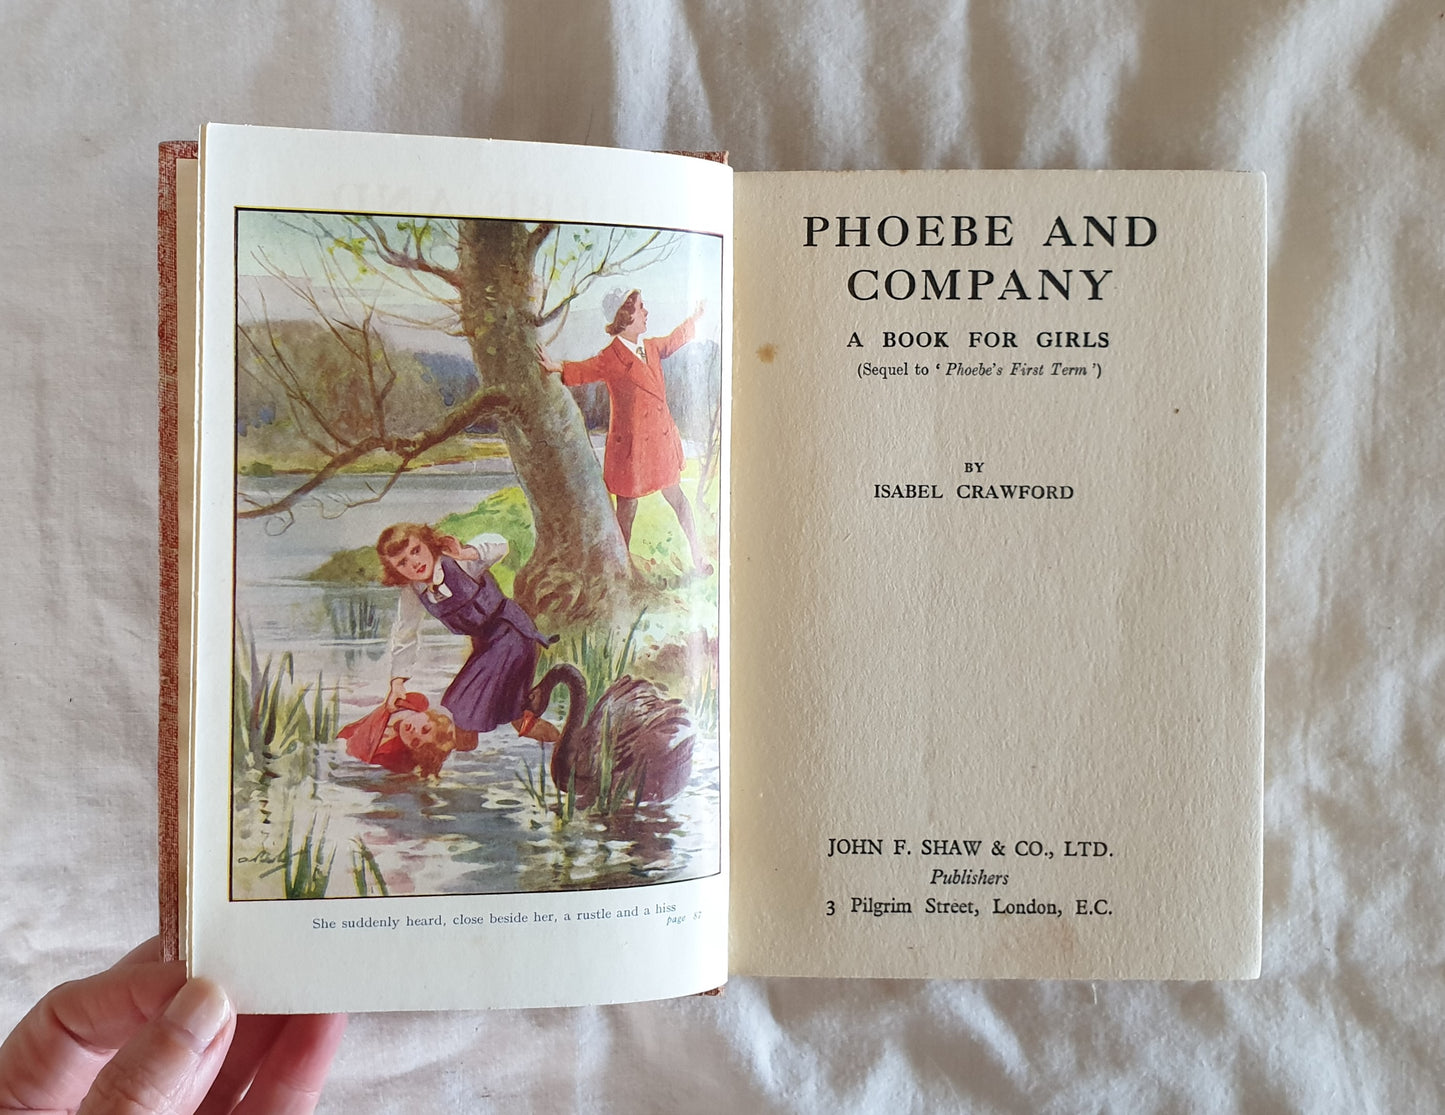 Phoebe and Company by Isabel Crawford